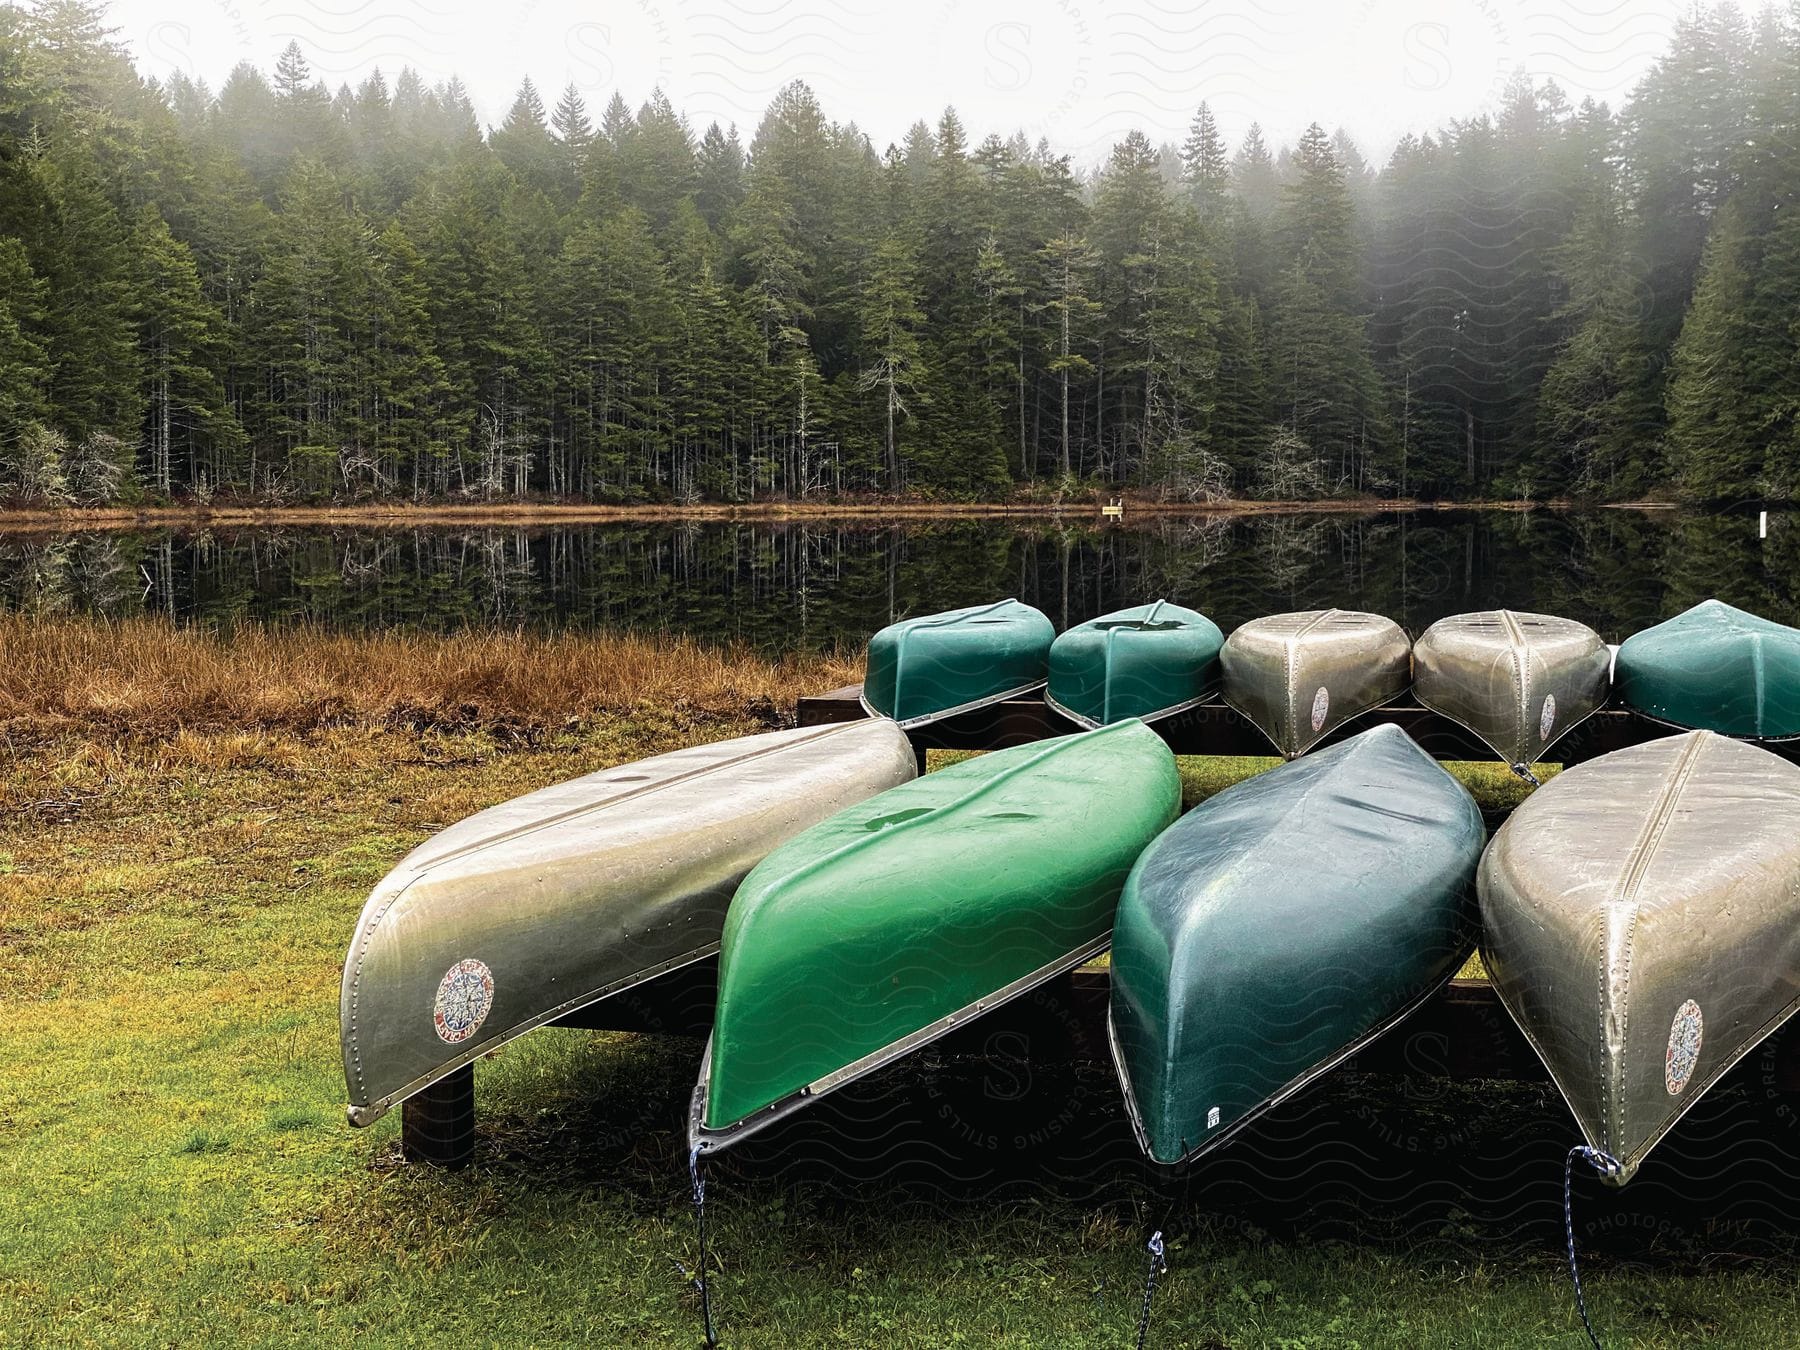 Canoes are lined up and flipped over on a rack along the coast of a lake surrounded by forests